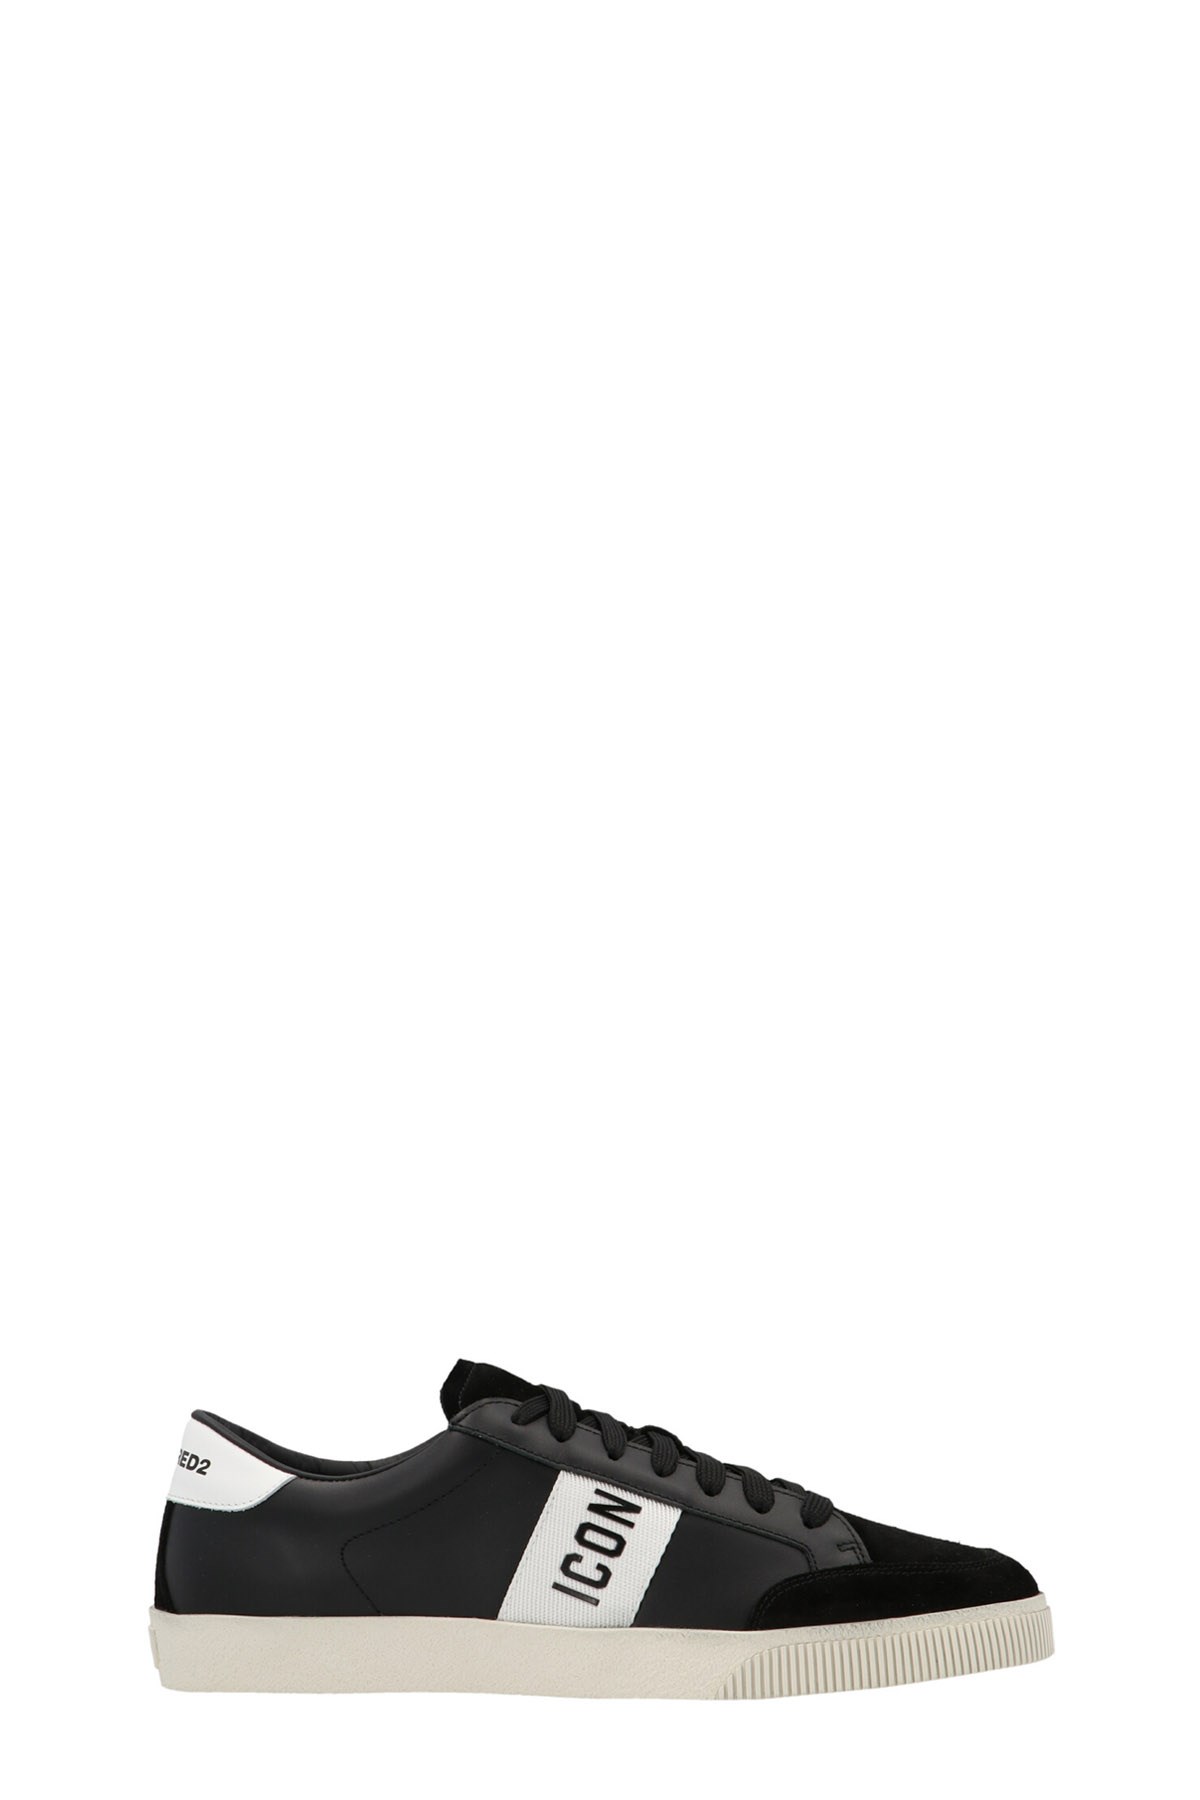 DSQUARED2 'Icon' Sneakers